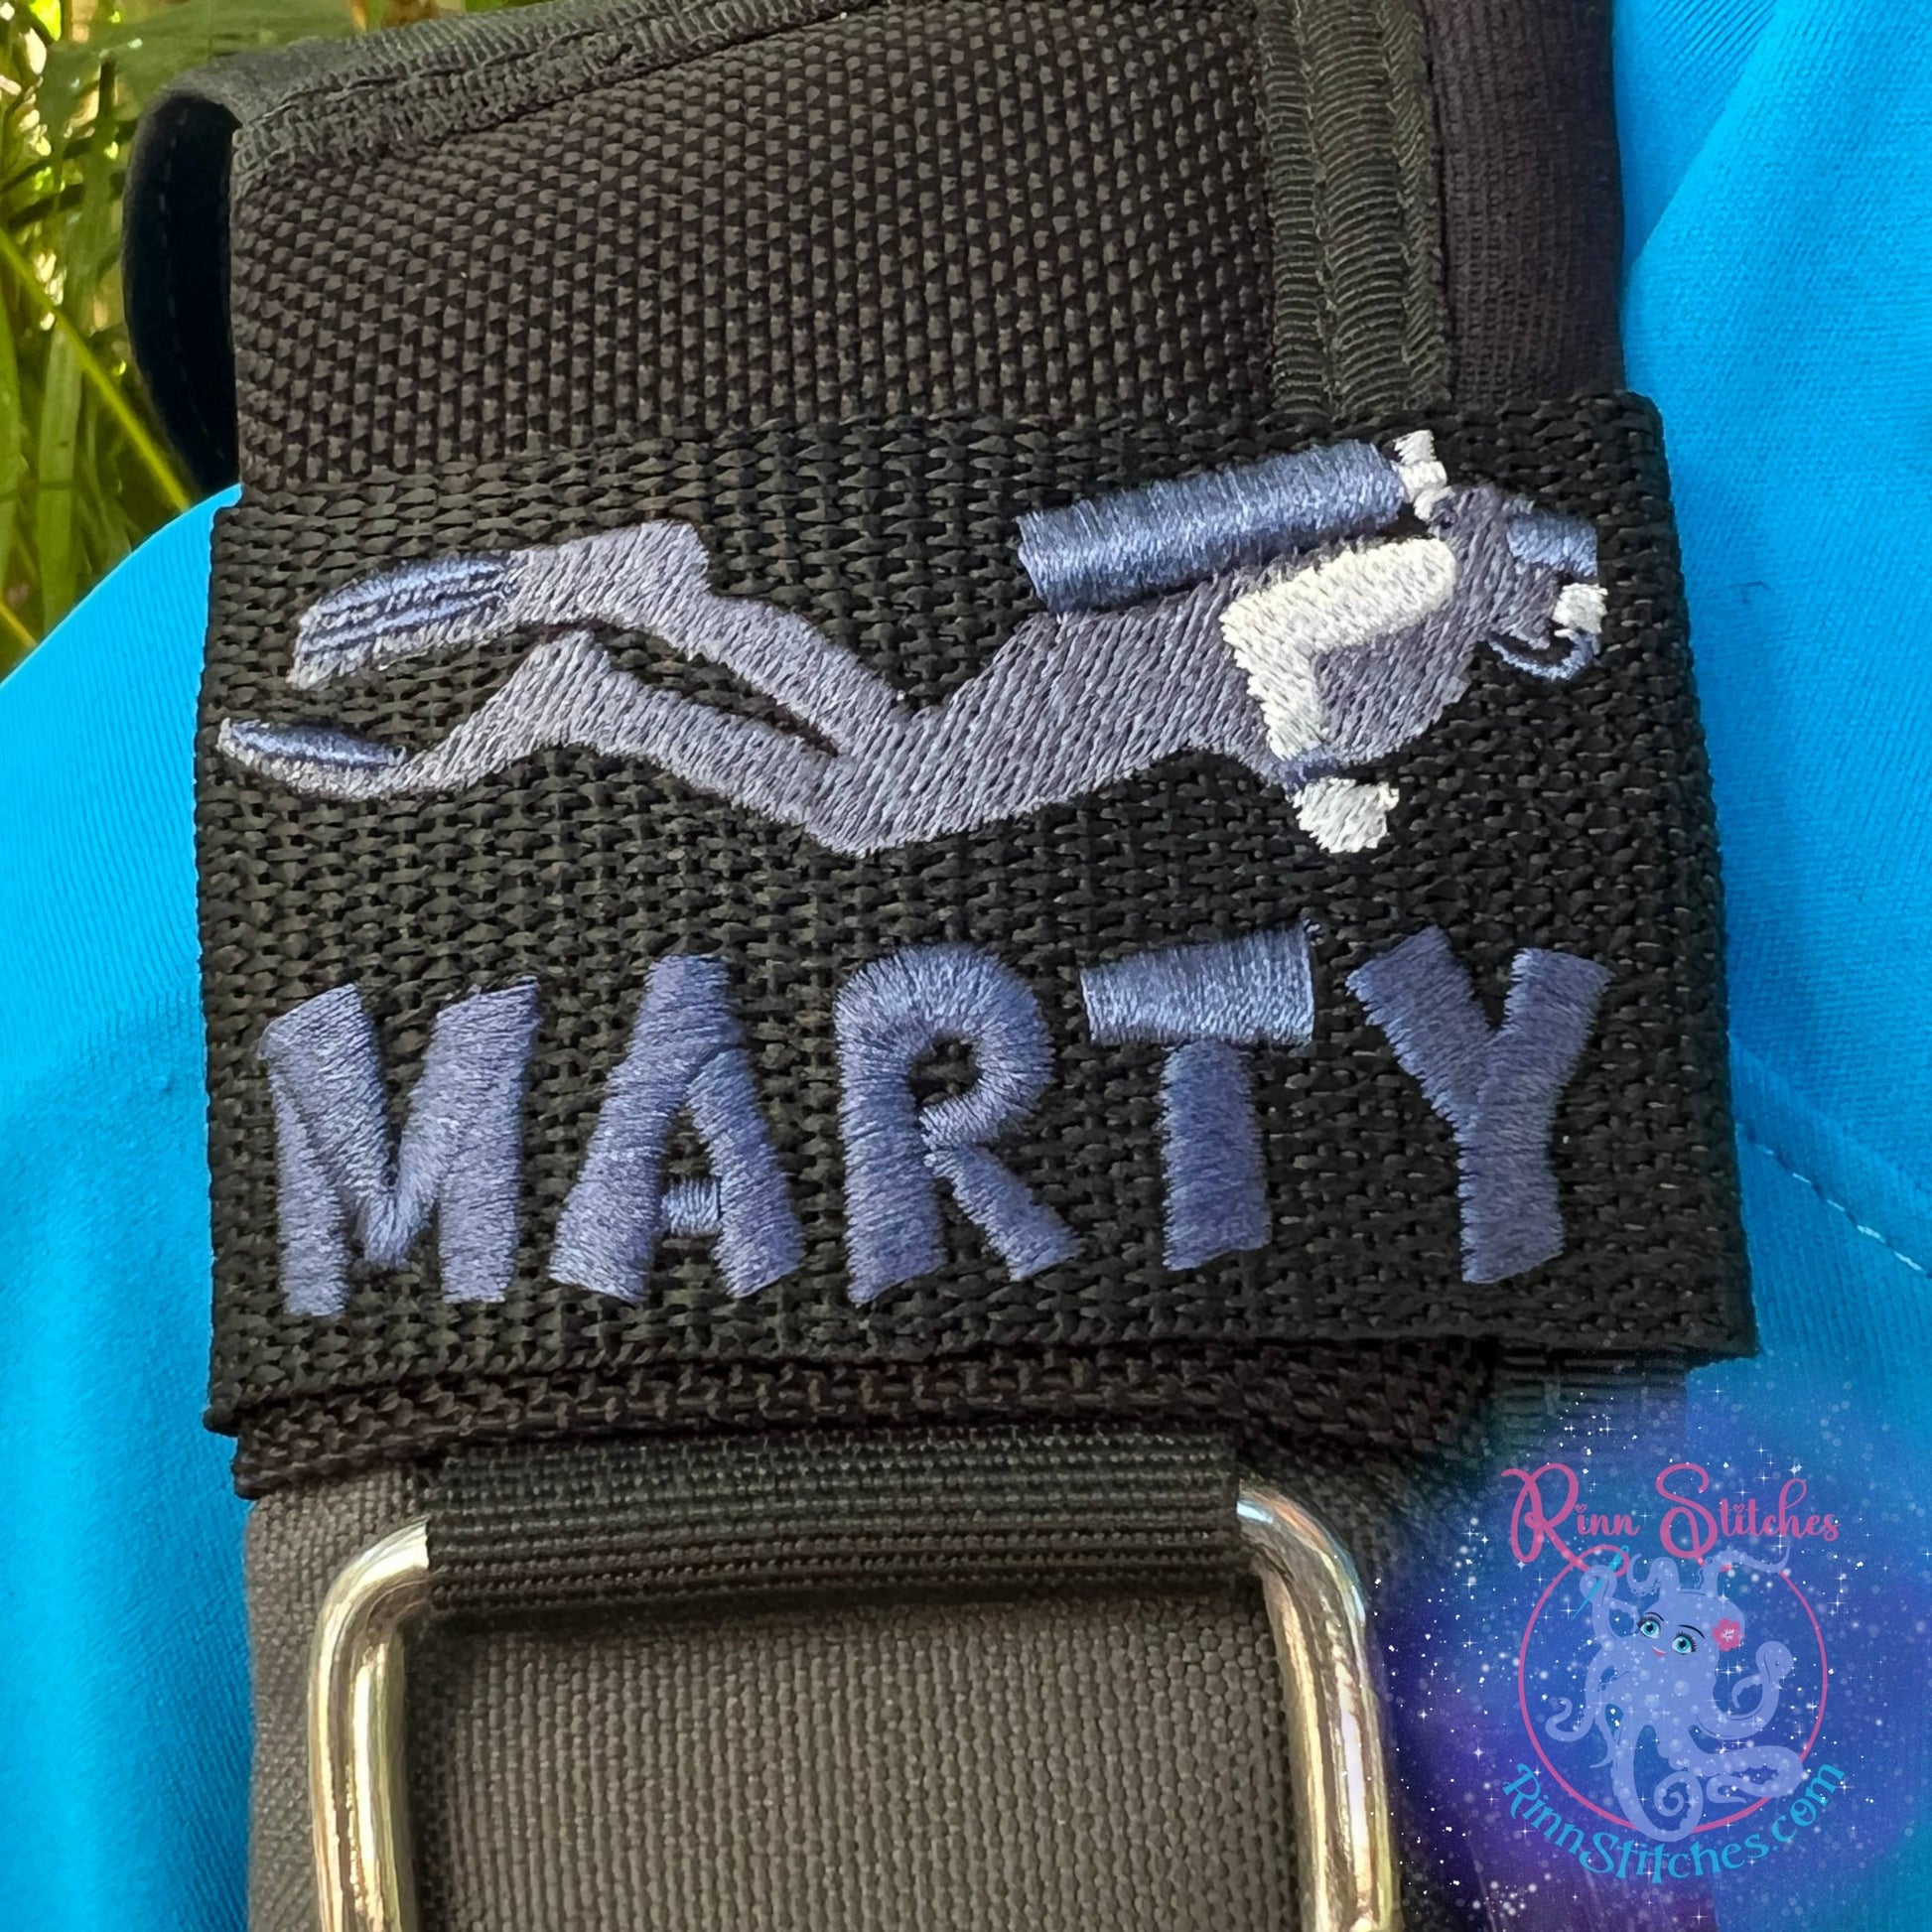 Scuba Diver Personalized BCD Tag - Scuba Dude - Scuba Chick - By Rinn Stitches on Maui, Hawaii